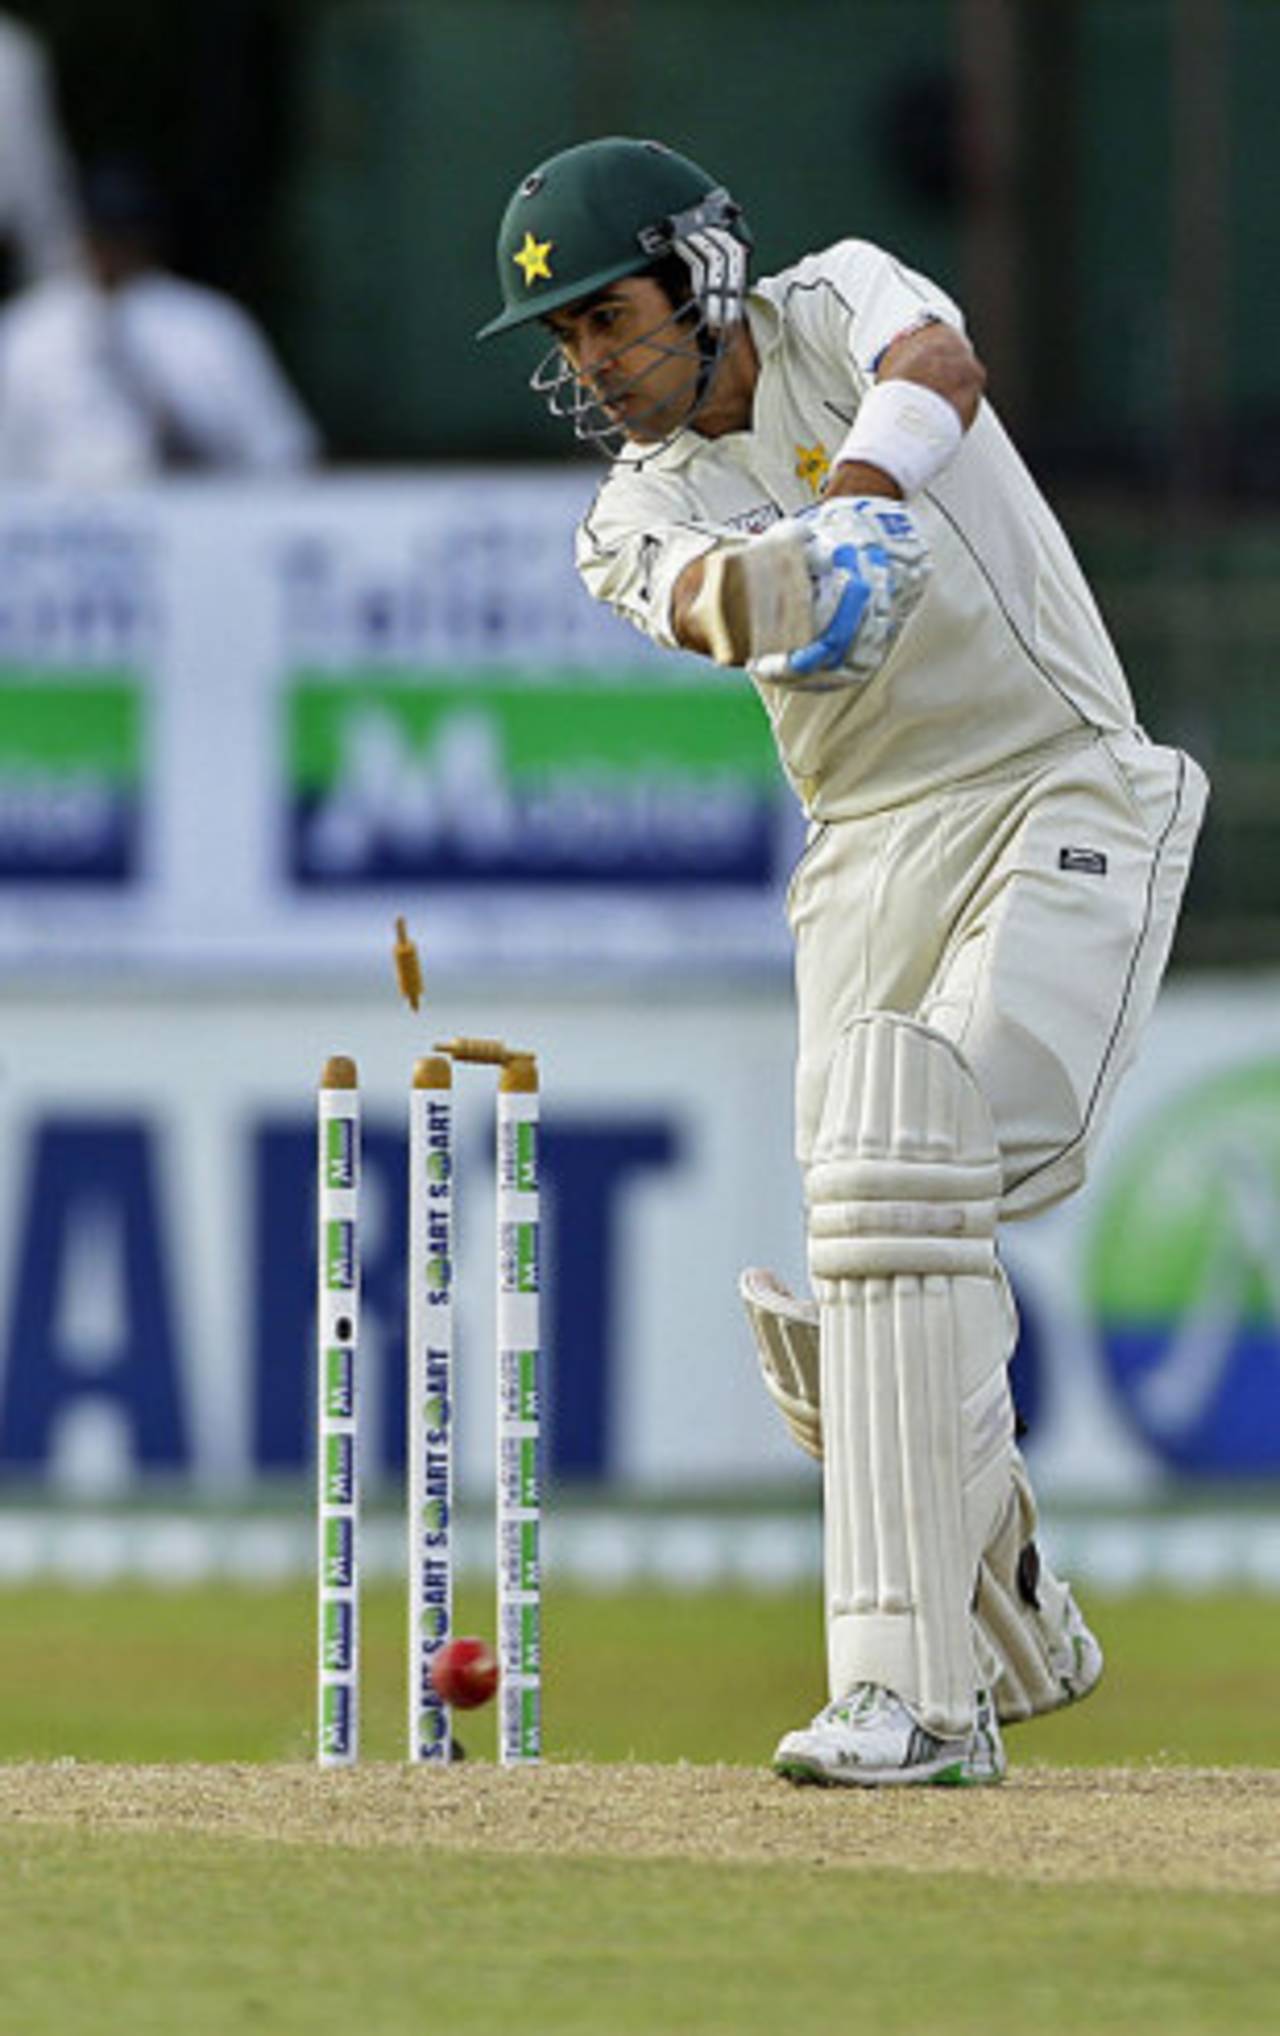 Umar Gul is bowled late in the day, Sri Lanka v Pakistan, 3rd Test, 1st day, Colombo, July 20, 2009 